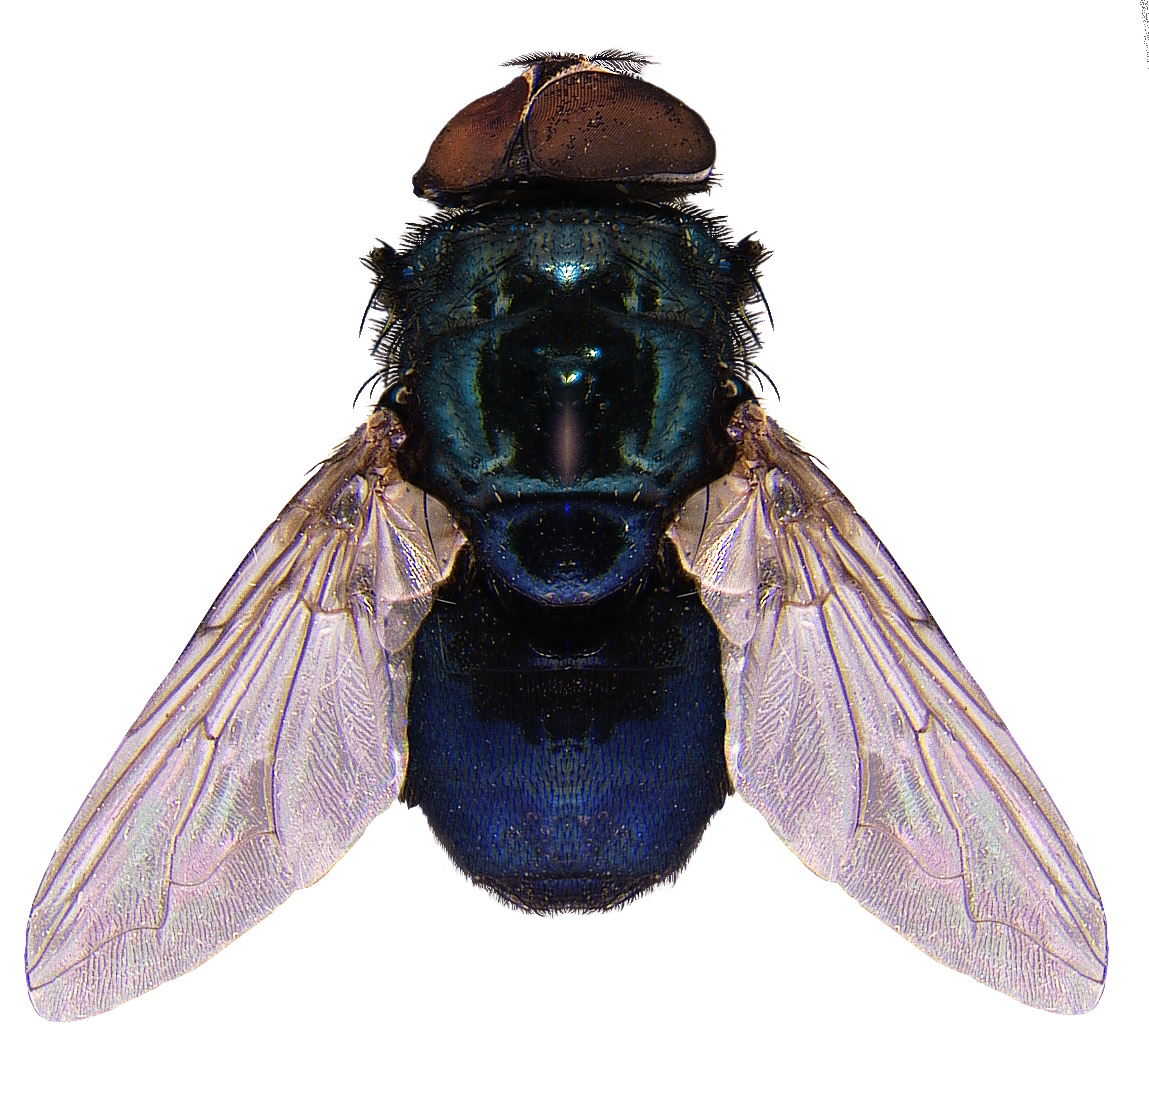 #15 Blow fly